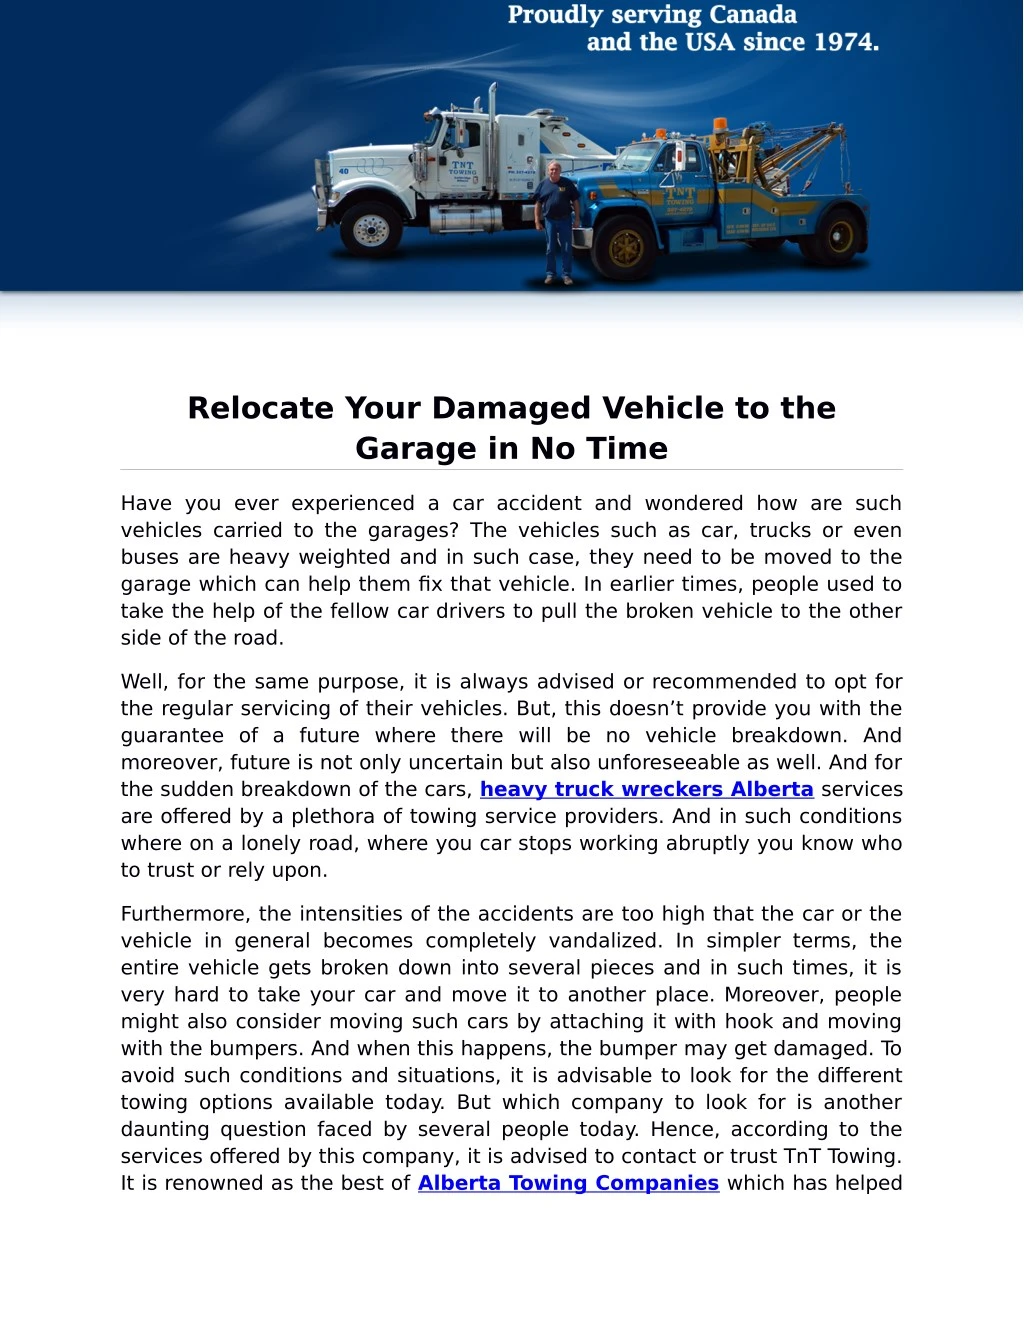 relocate your damaged vehicle to the garage